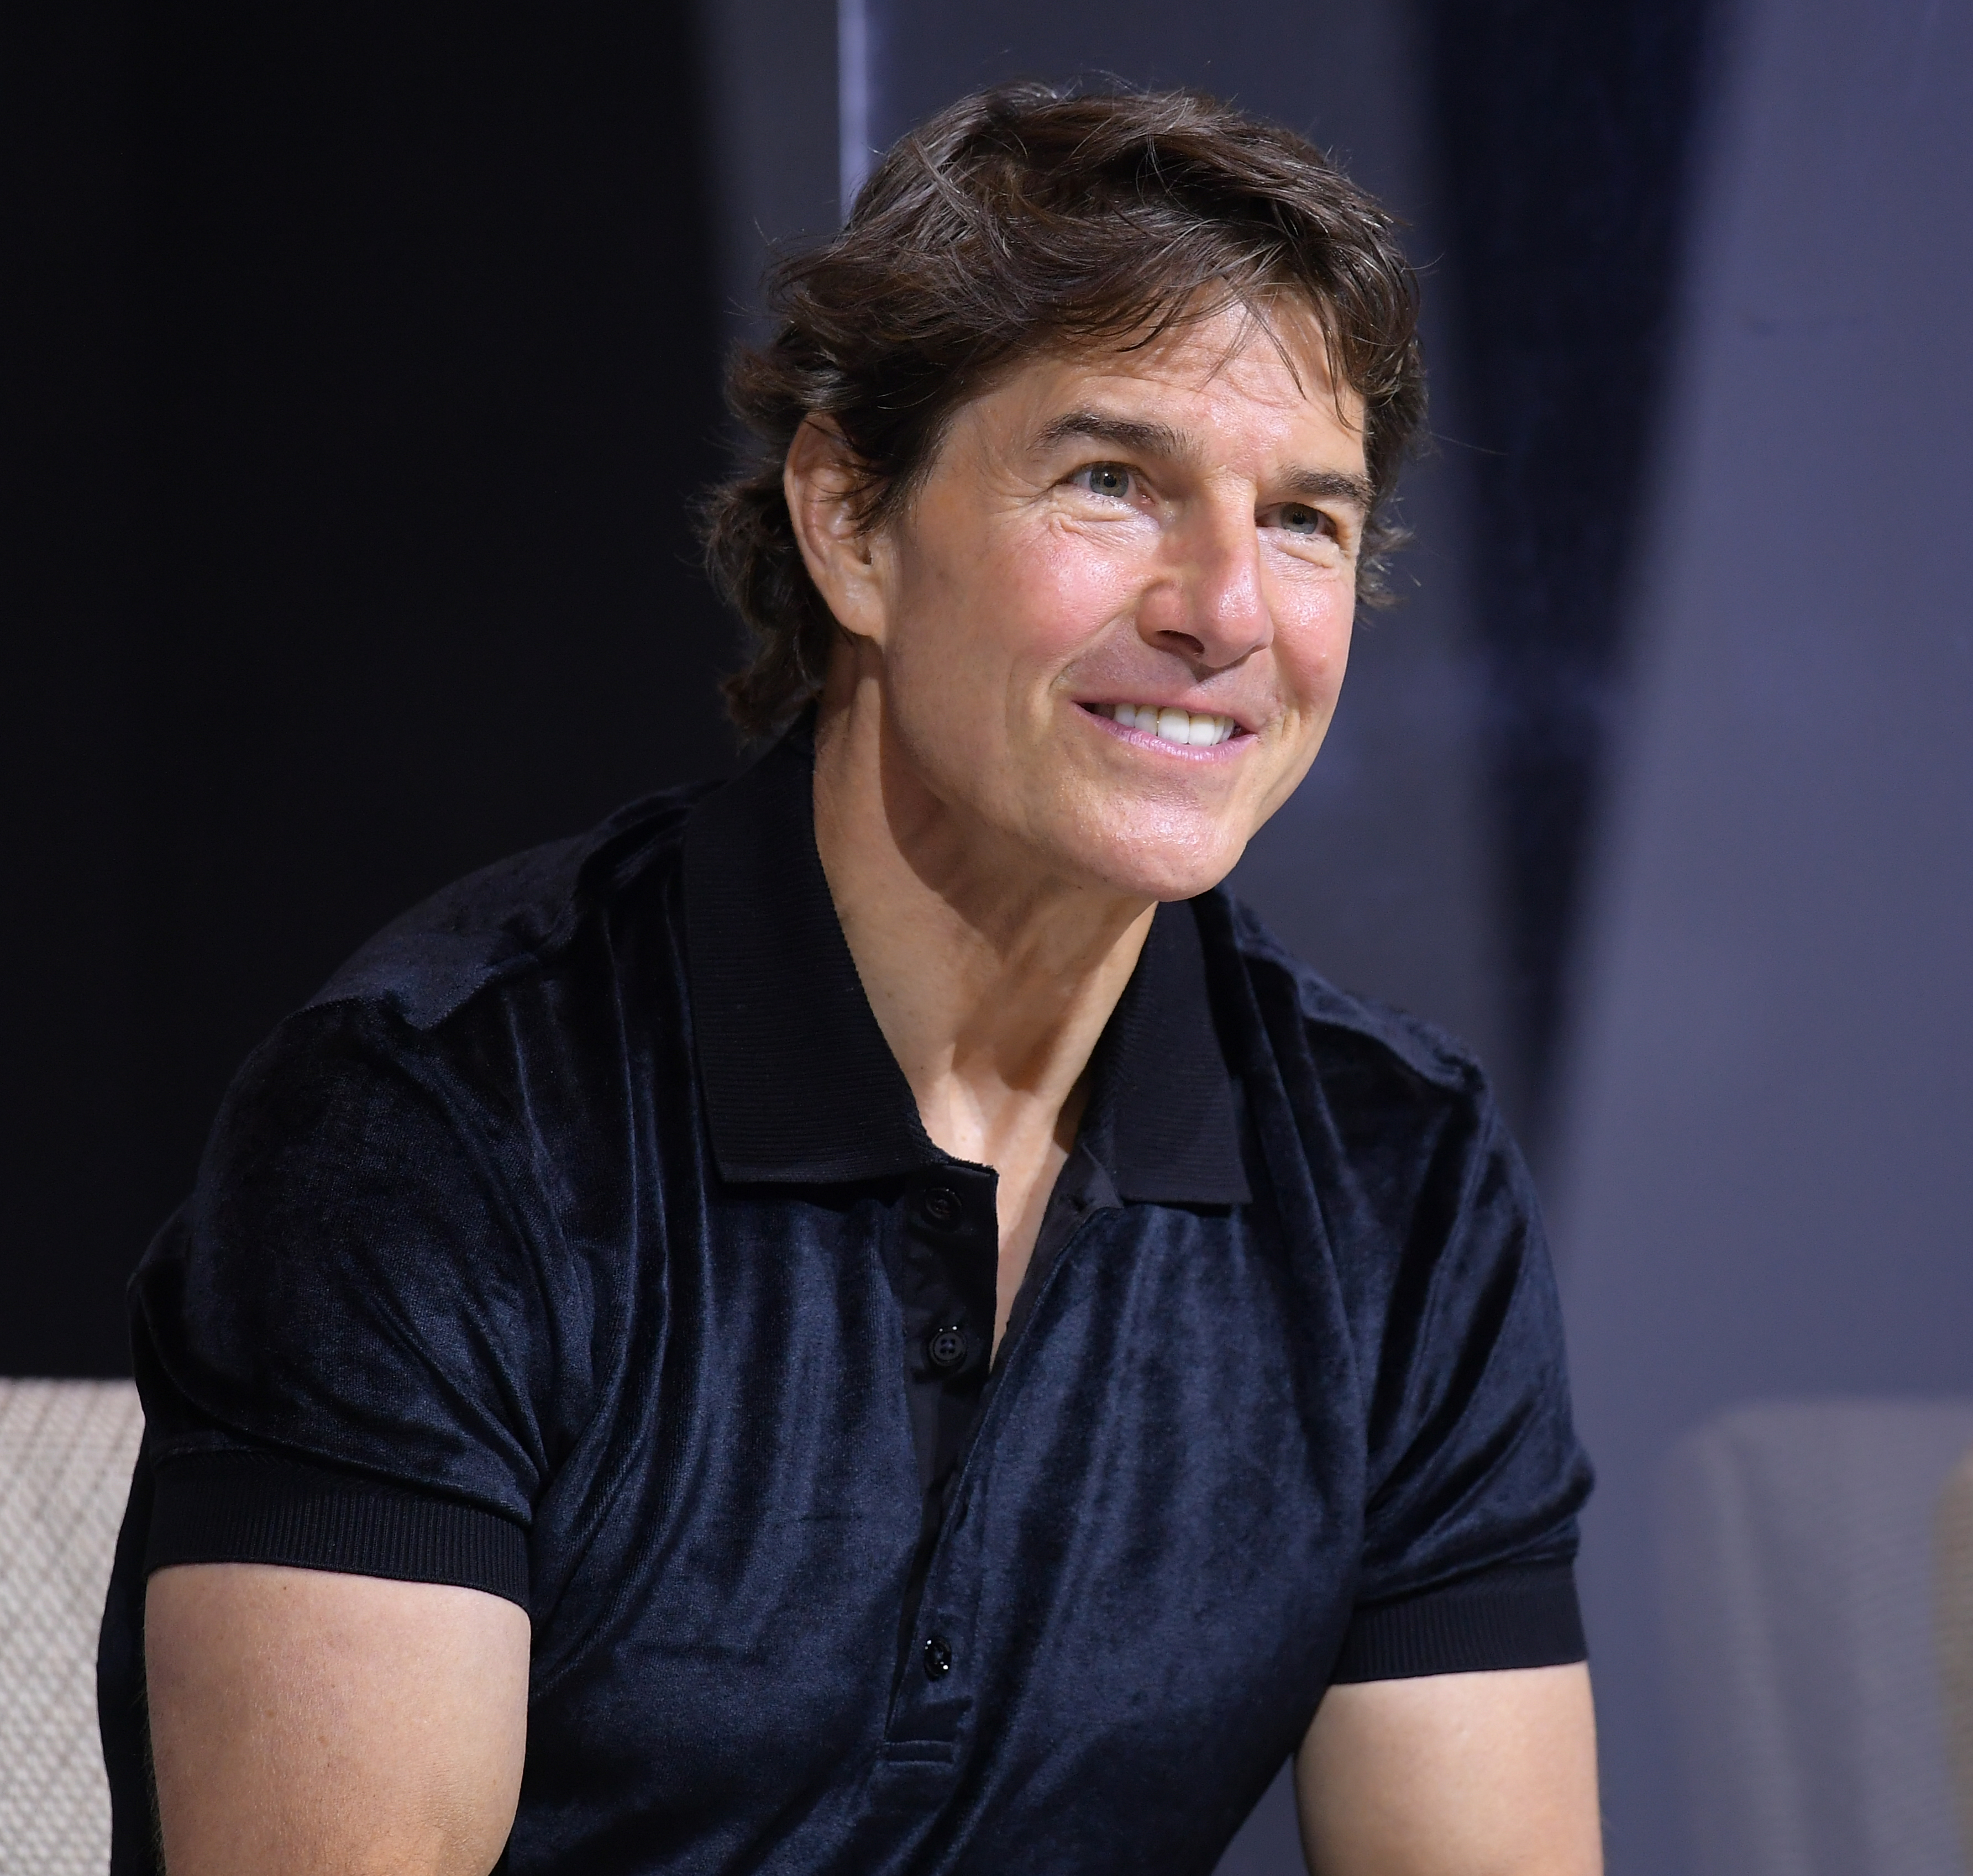 Tom Cruise during a press conference of the movie "Top Gun: Maverick" on June 20, 2022 in Seoul, South Korea | Source: Getty Images